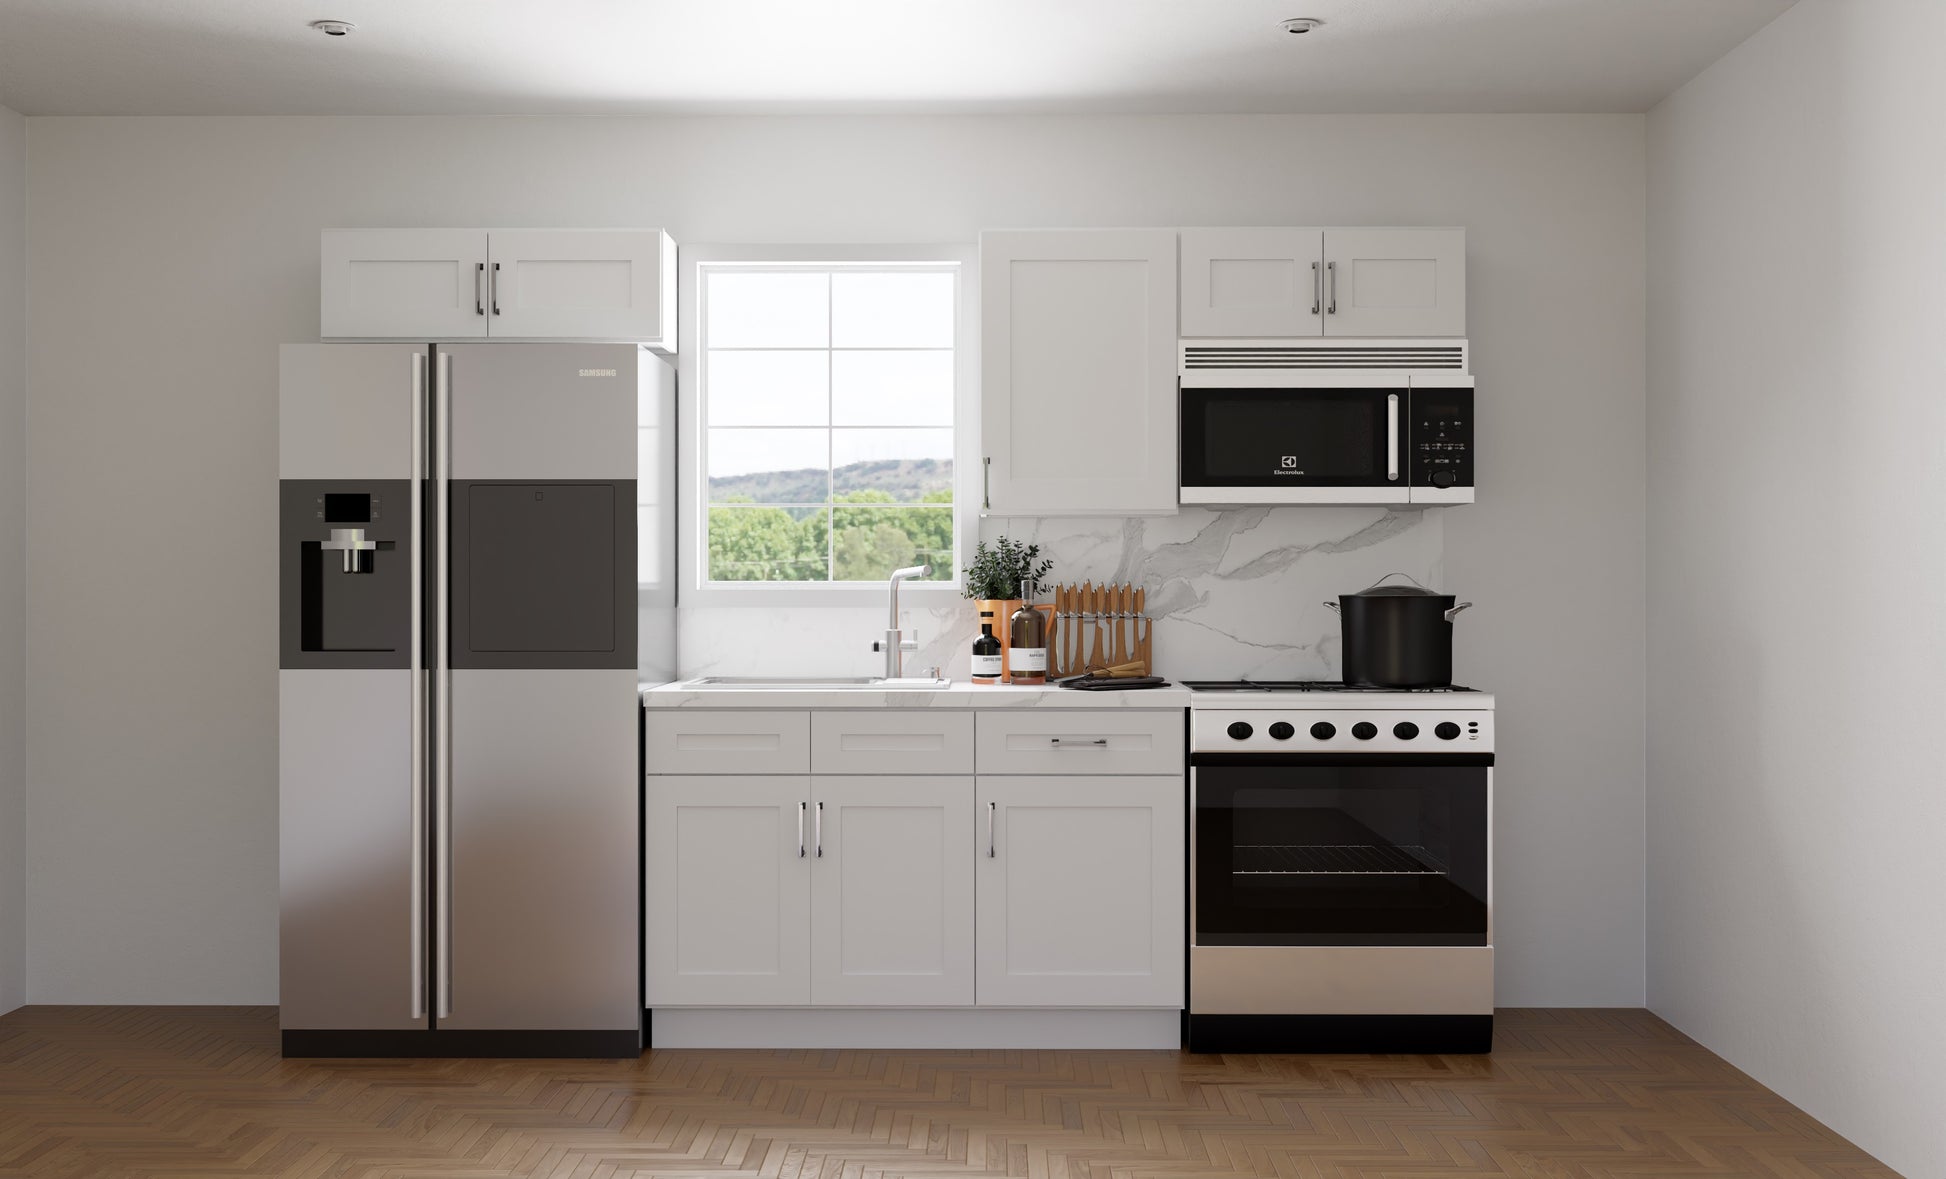 10 Special Kitchen Cabinet Features